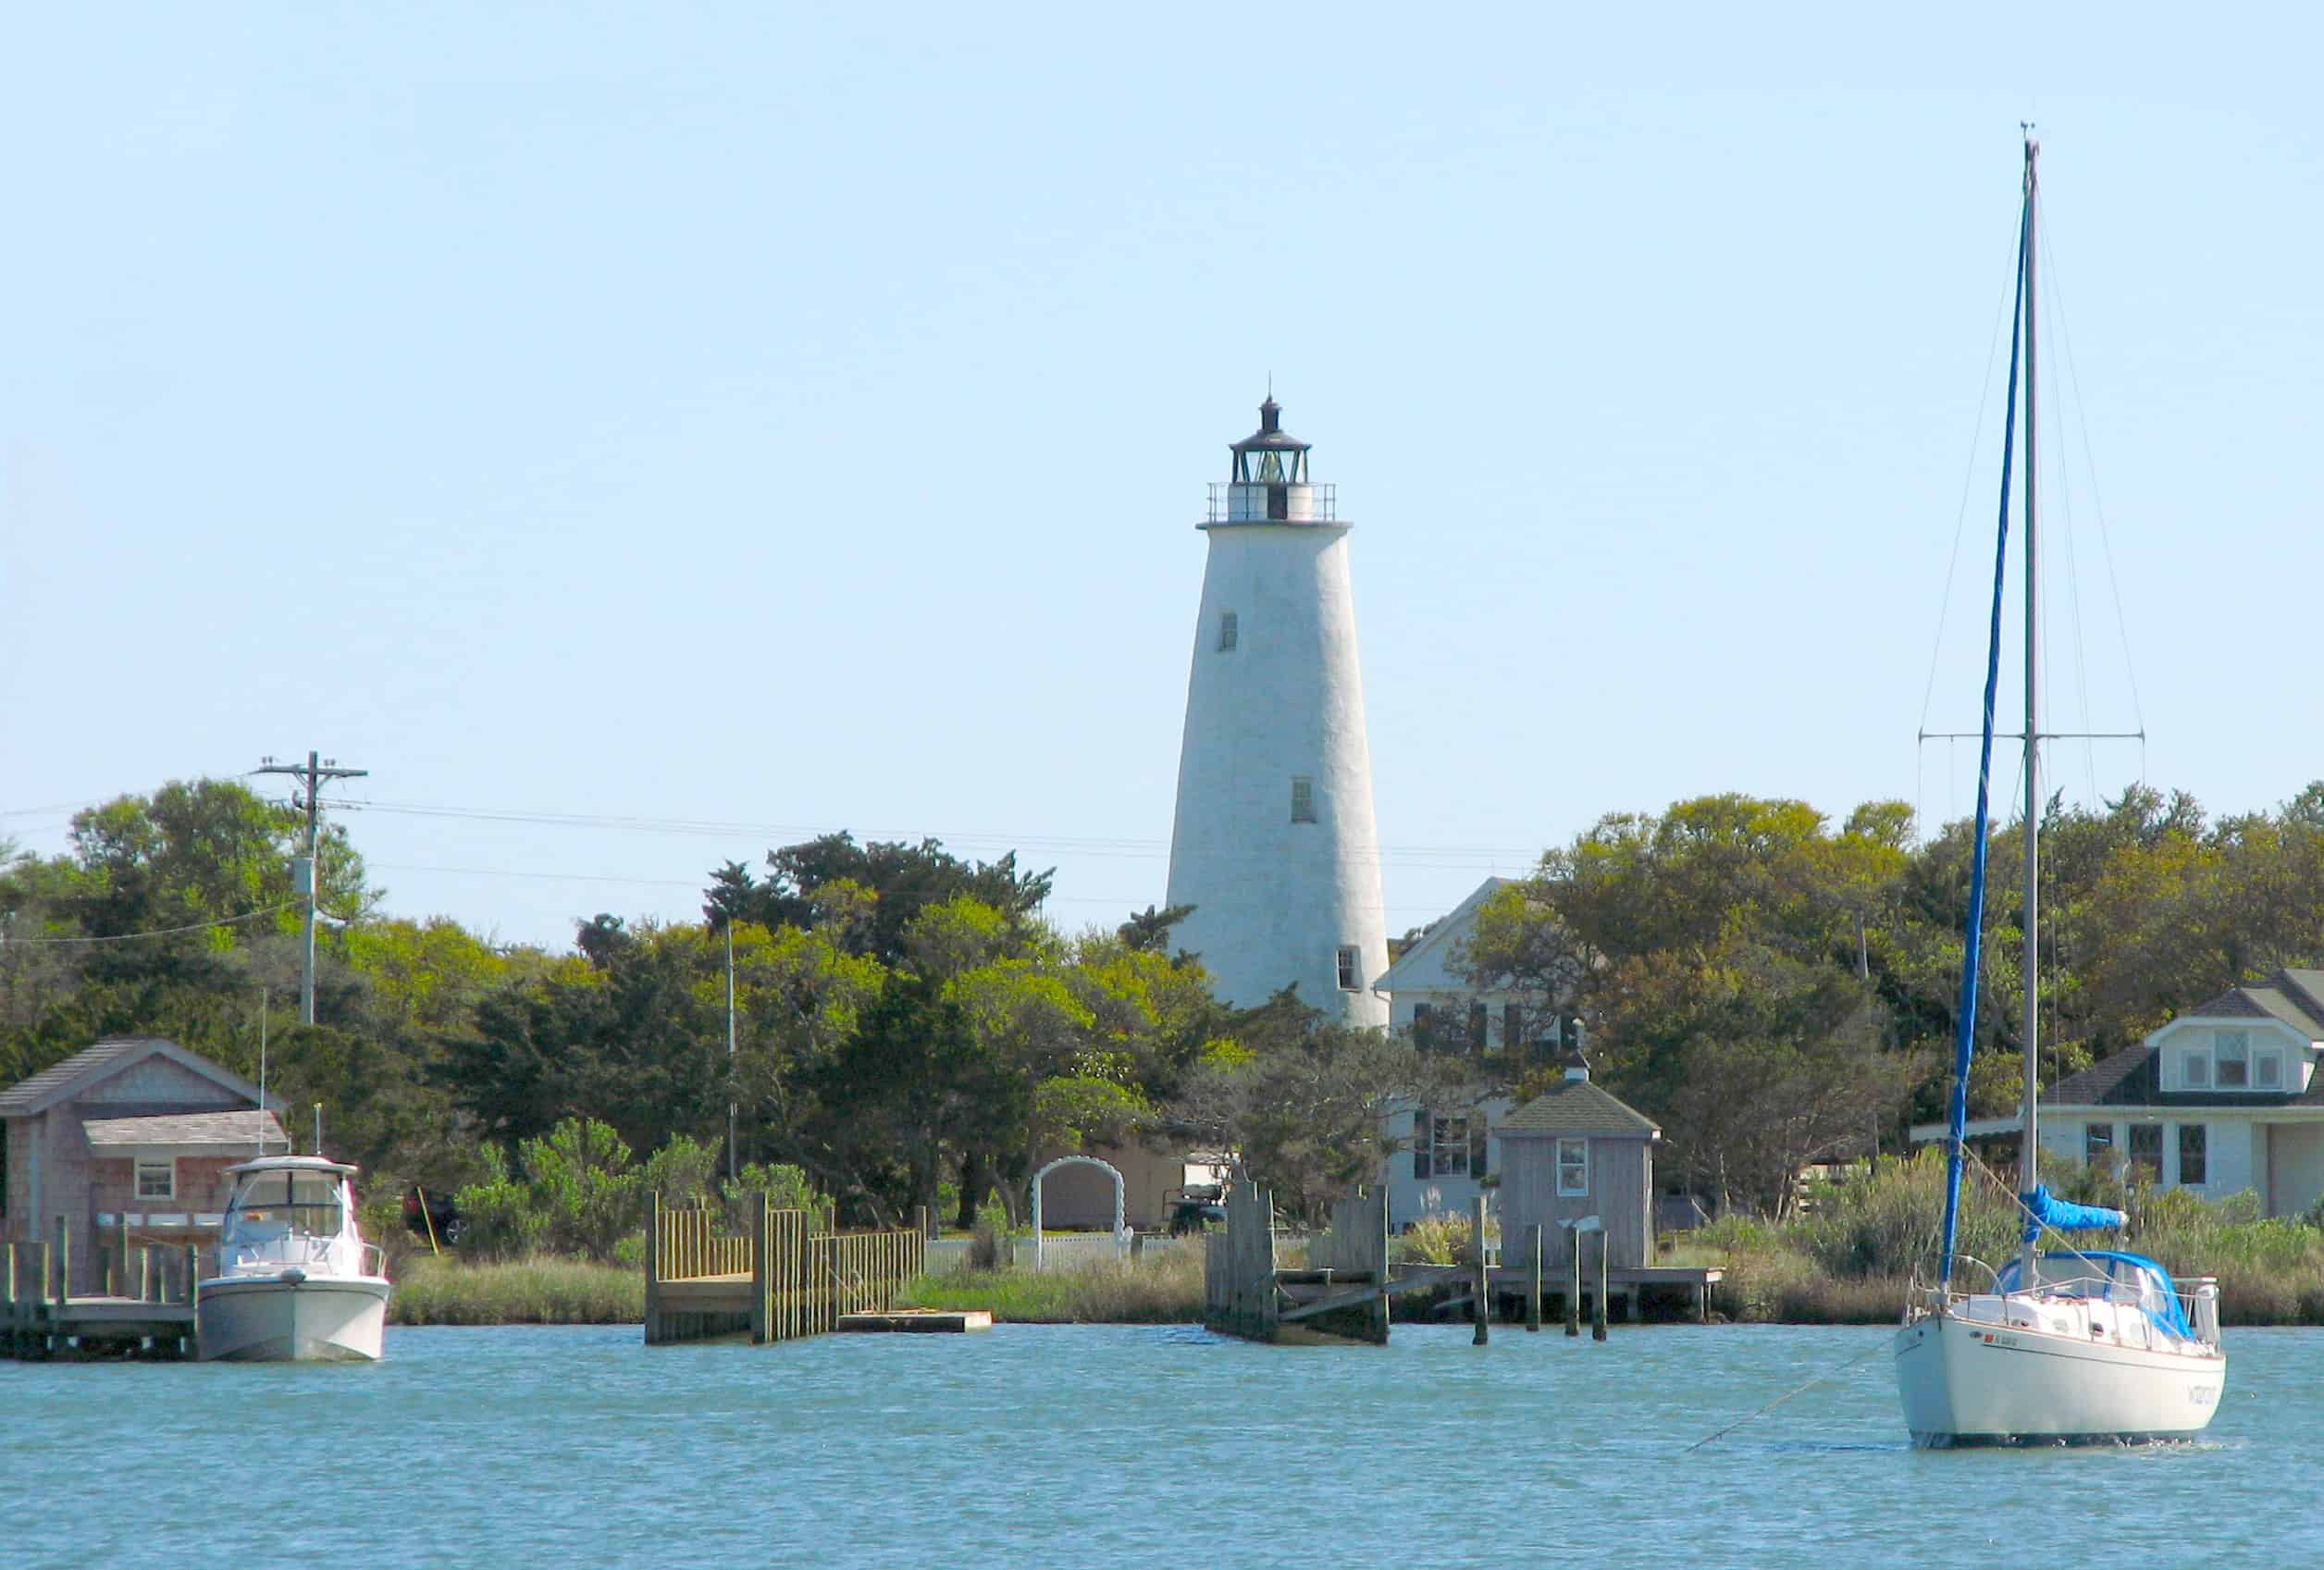 View of Ocracoke Lighthouse from the Anchorage Marina